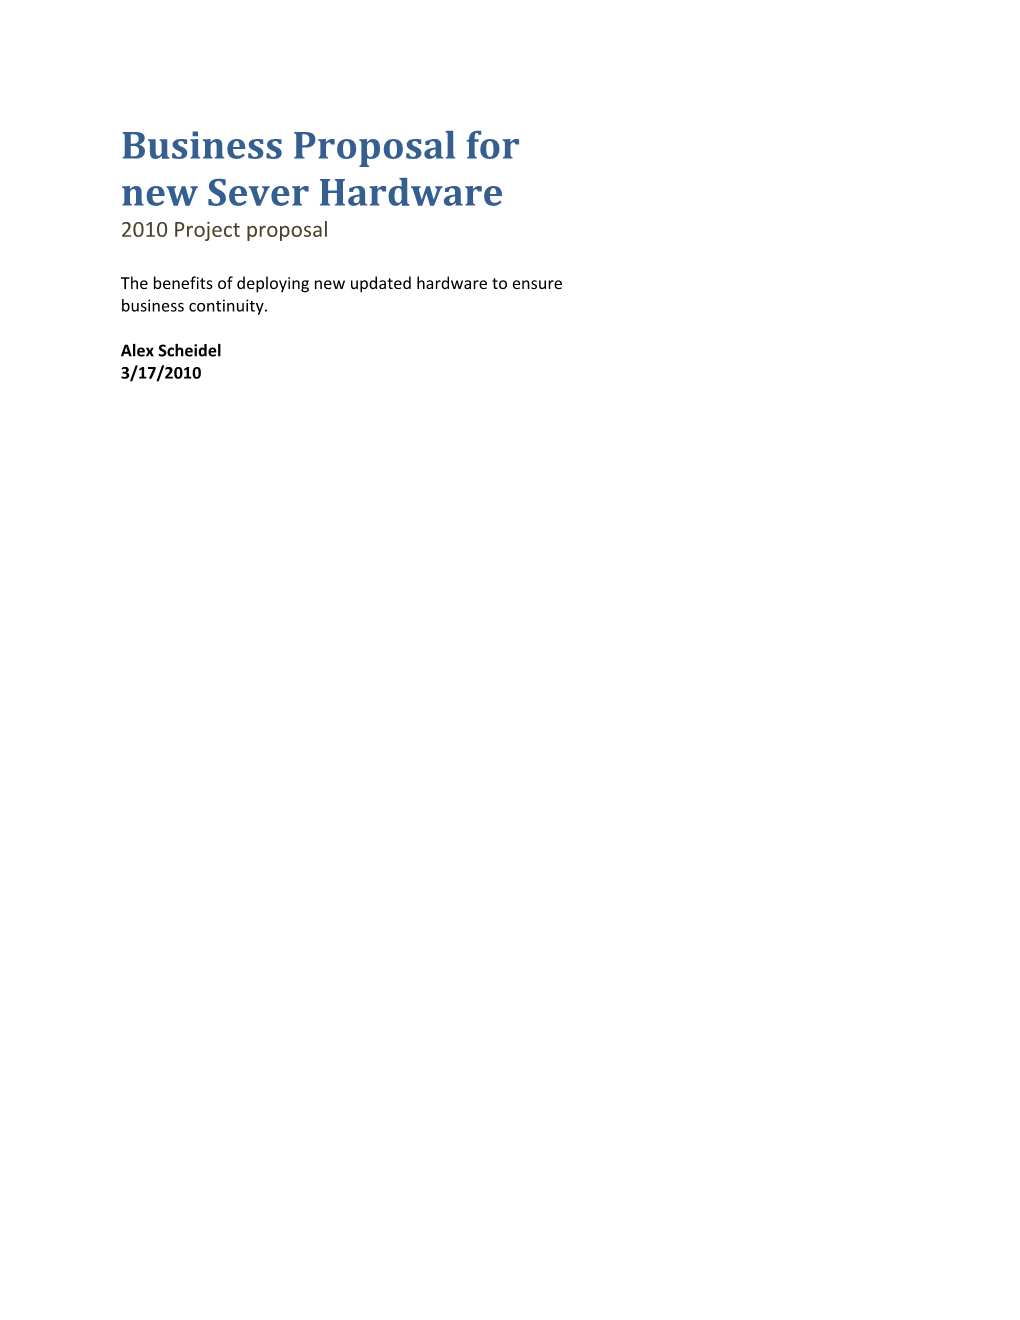 Business Proposal for New Sever Hardware